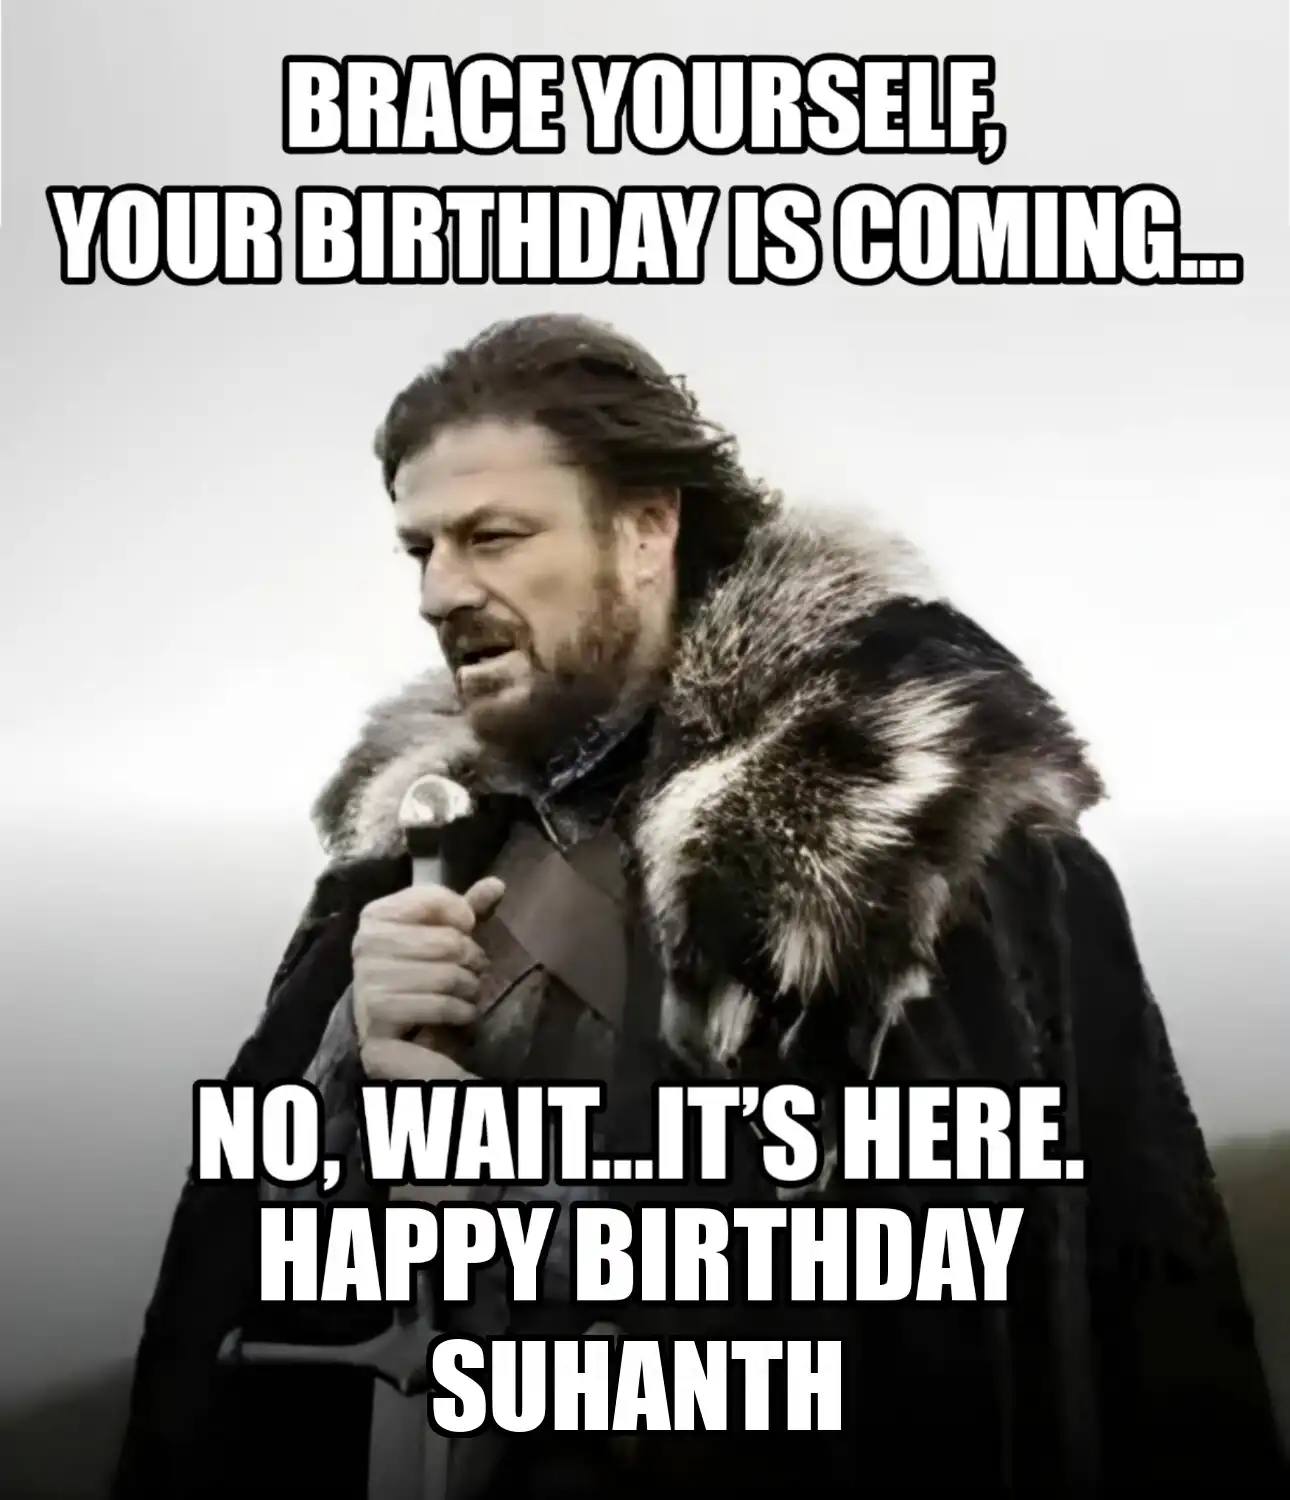 Happy Birthday Suhanth Brace Yourself Your Birthday Is Coming Meme